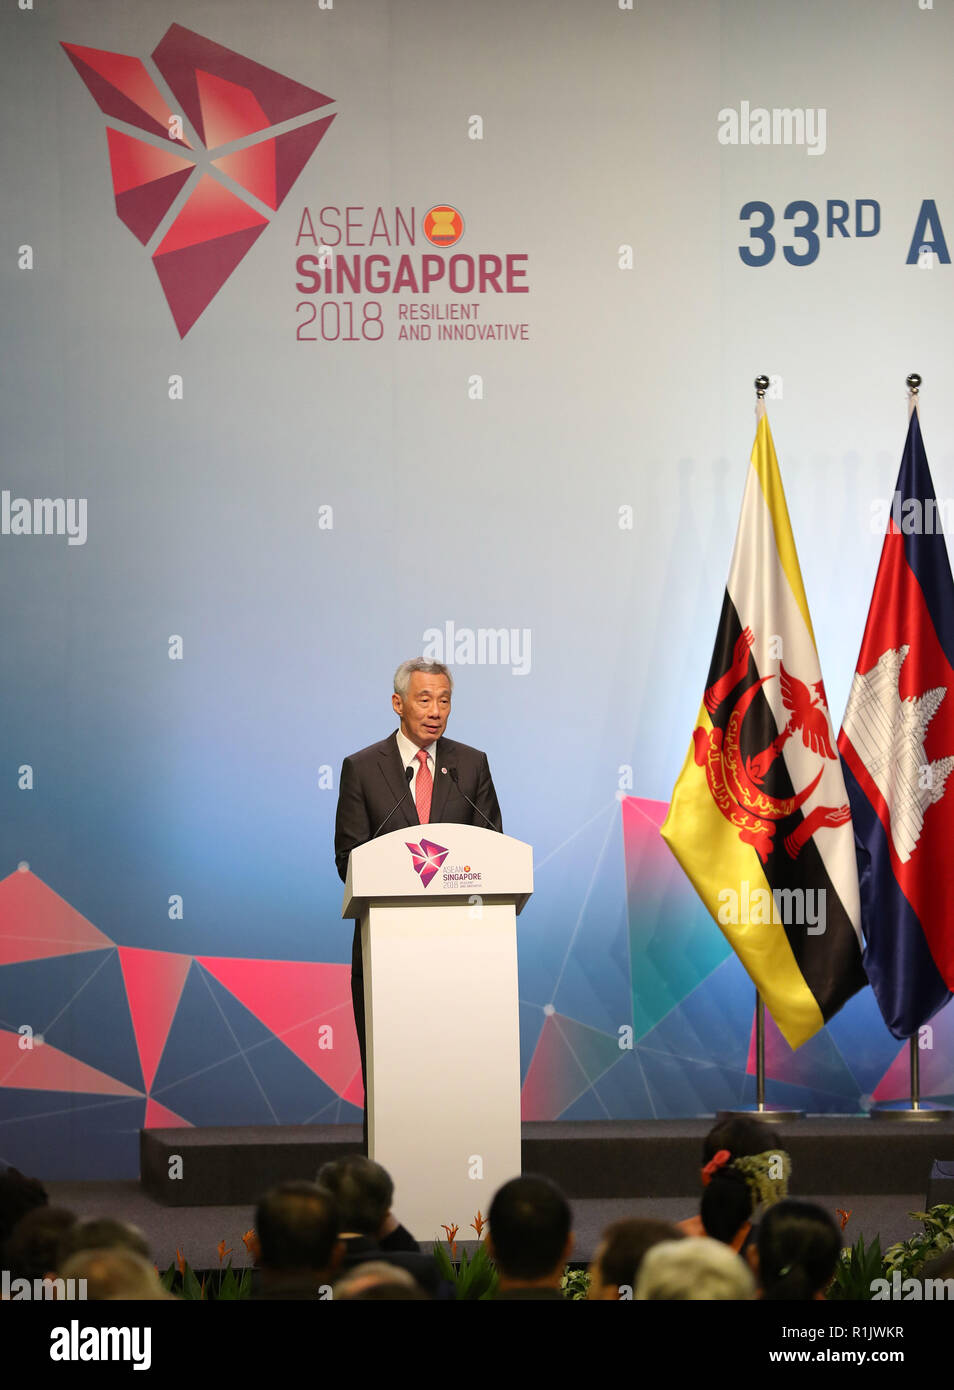 Singapore. 13th Nov, 2018. Singaporean Prime Minister Lee Hsien Loong addresses the opening ceremony of the 33rd summit of the Association of Southeast Asian Nations (ASEAN) in Singapore, on Nov. 13, 2018. The 33rd ASEAN summit opened here Tuesday with a call for upholding multilateralism and international cooperation. Credit: Li Gang/Xinhua/Alamy Live News Stock Photo